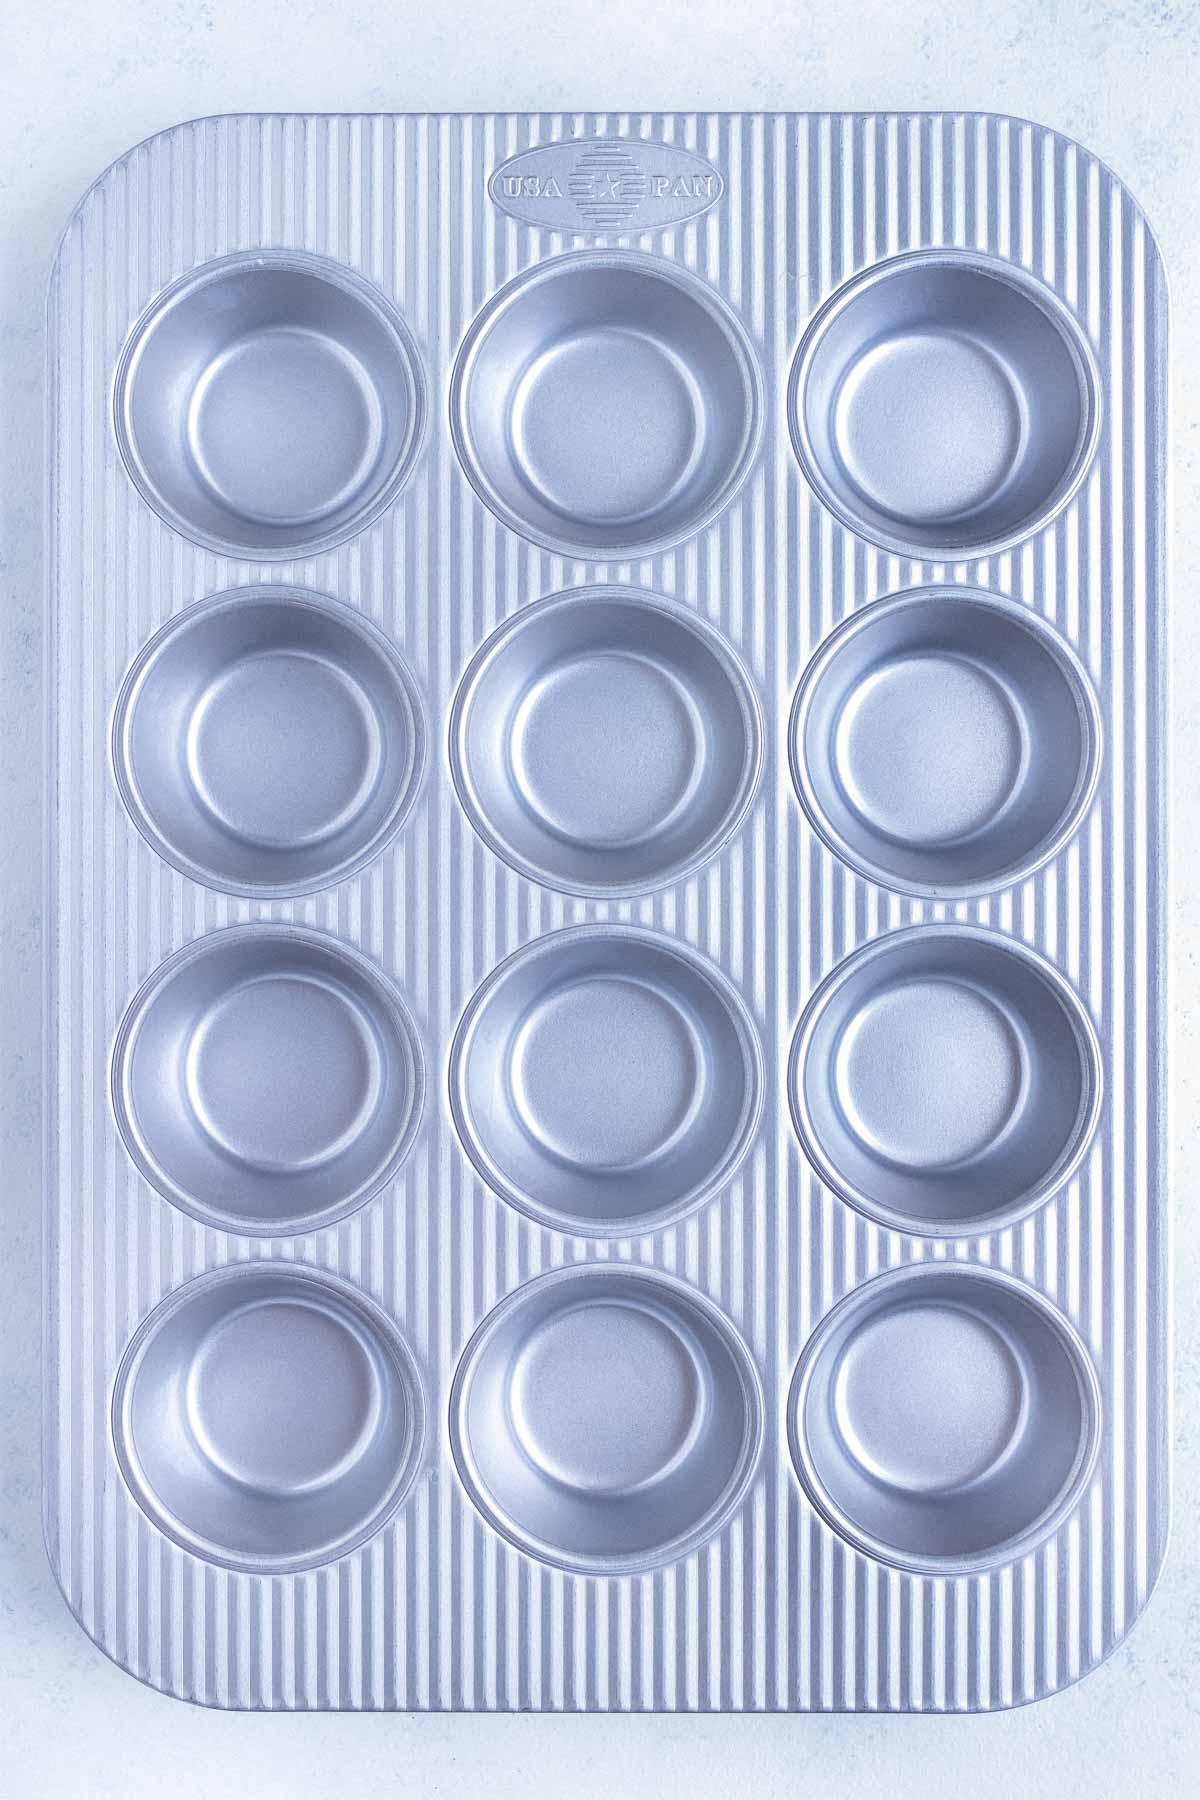 Be sure to choose the right type of muffin tin.